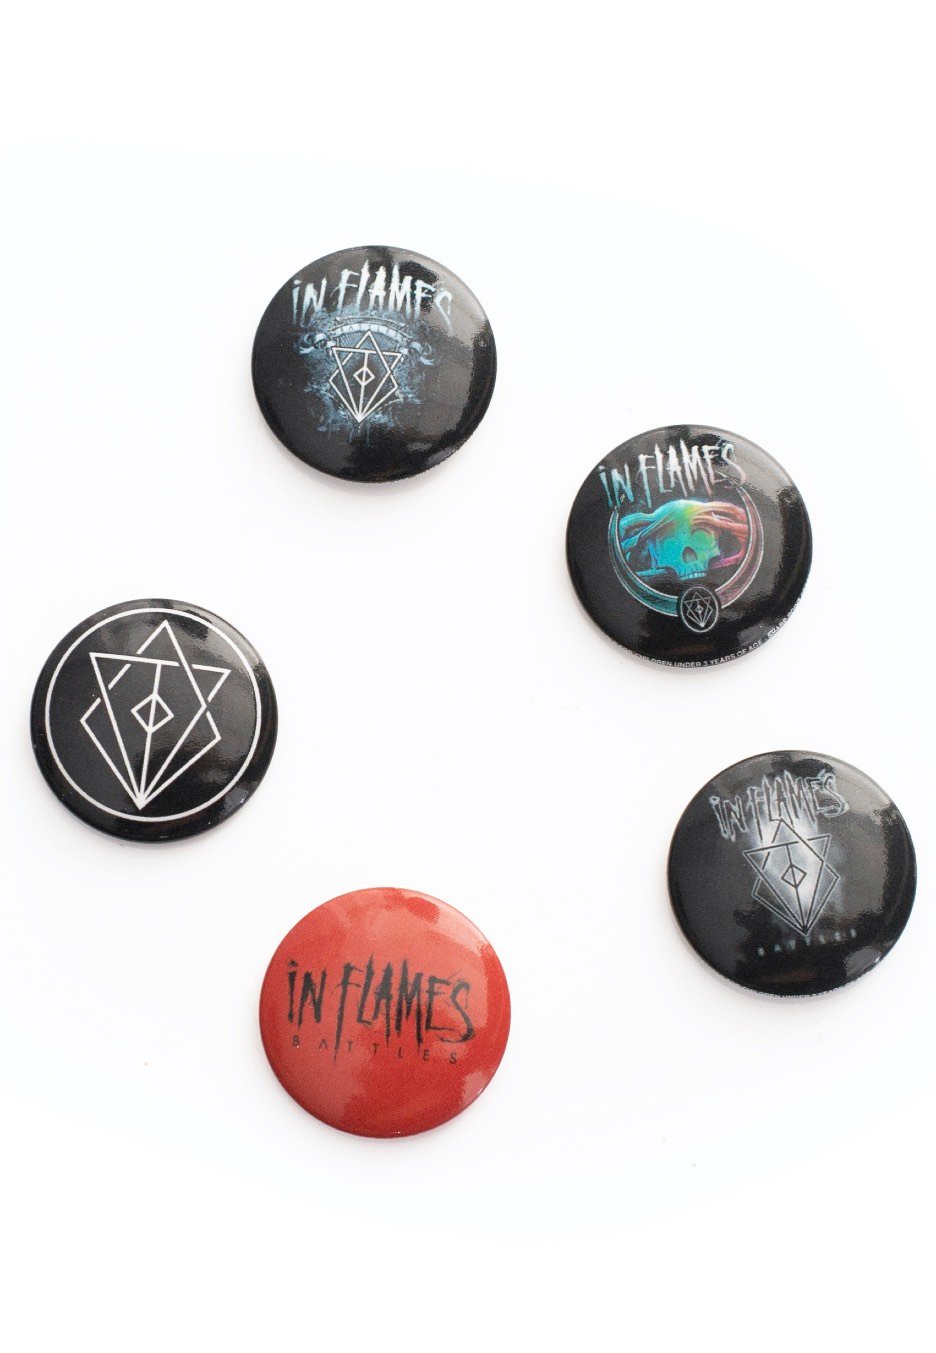 In Flames - Battles Pack Of 5 - Button Set